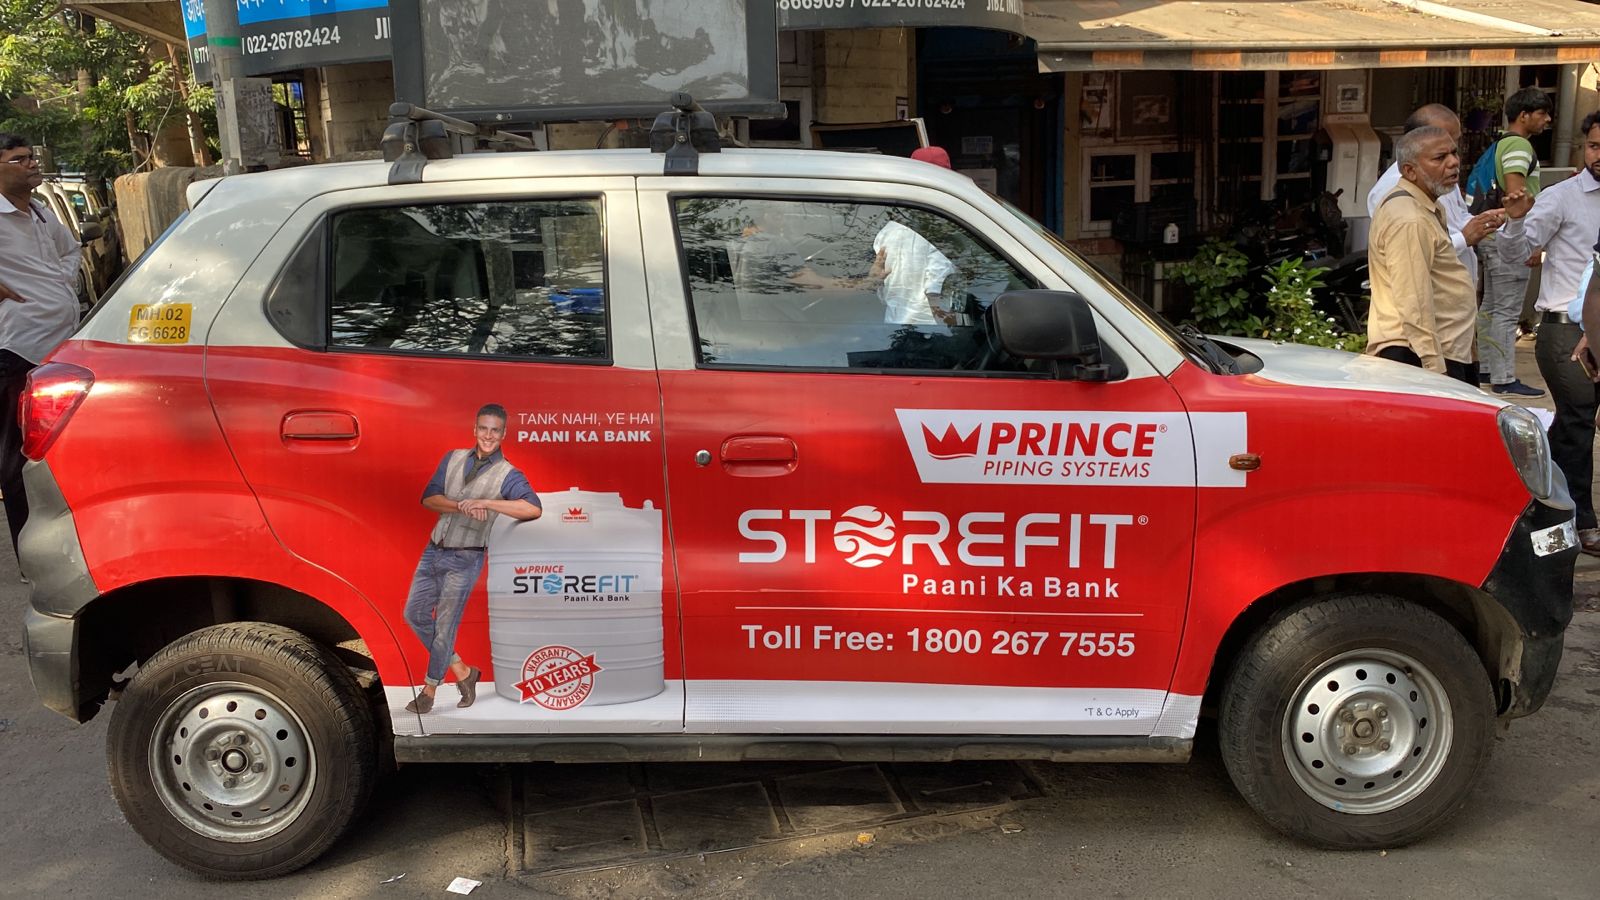 Partial car wrap branding executed for Prince Piping Systems by Wrap2Earn